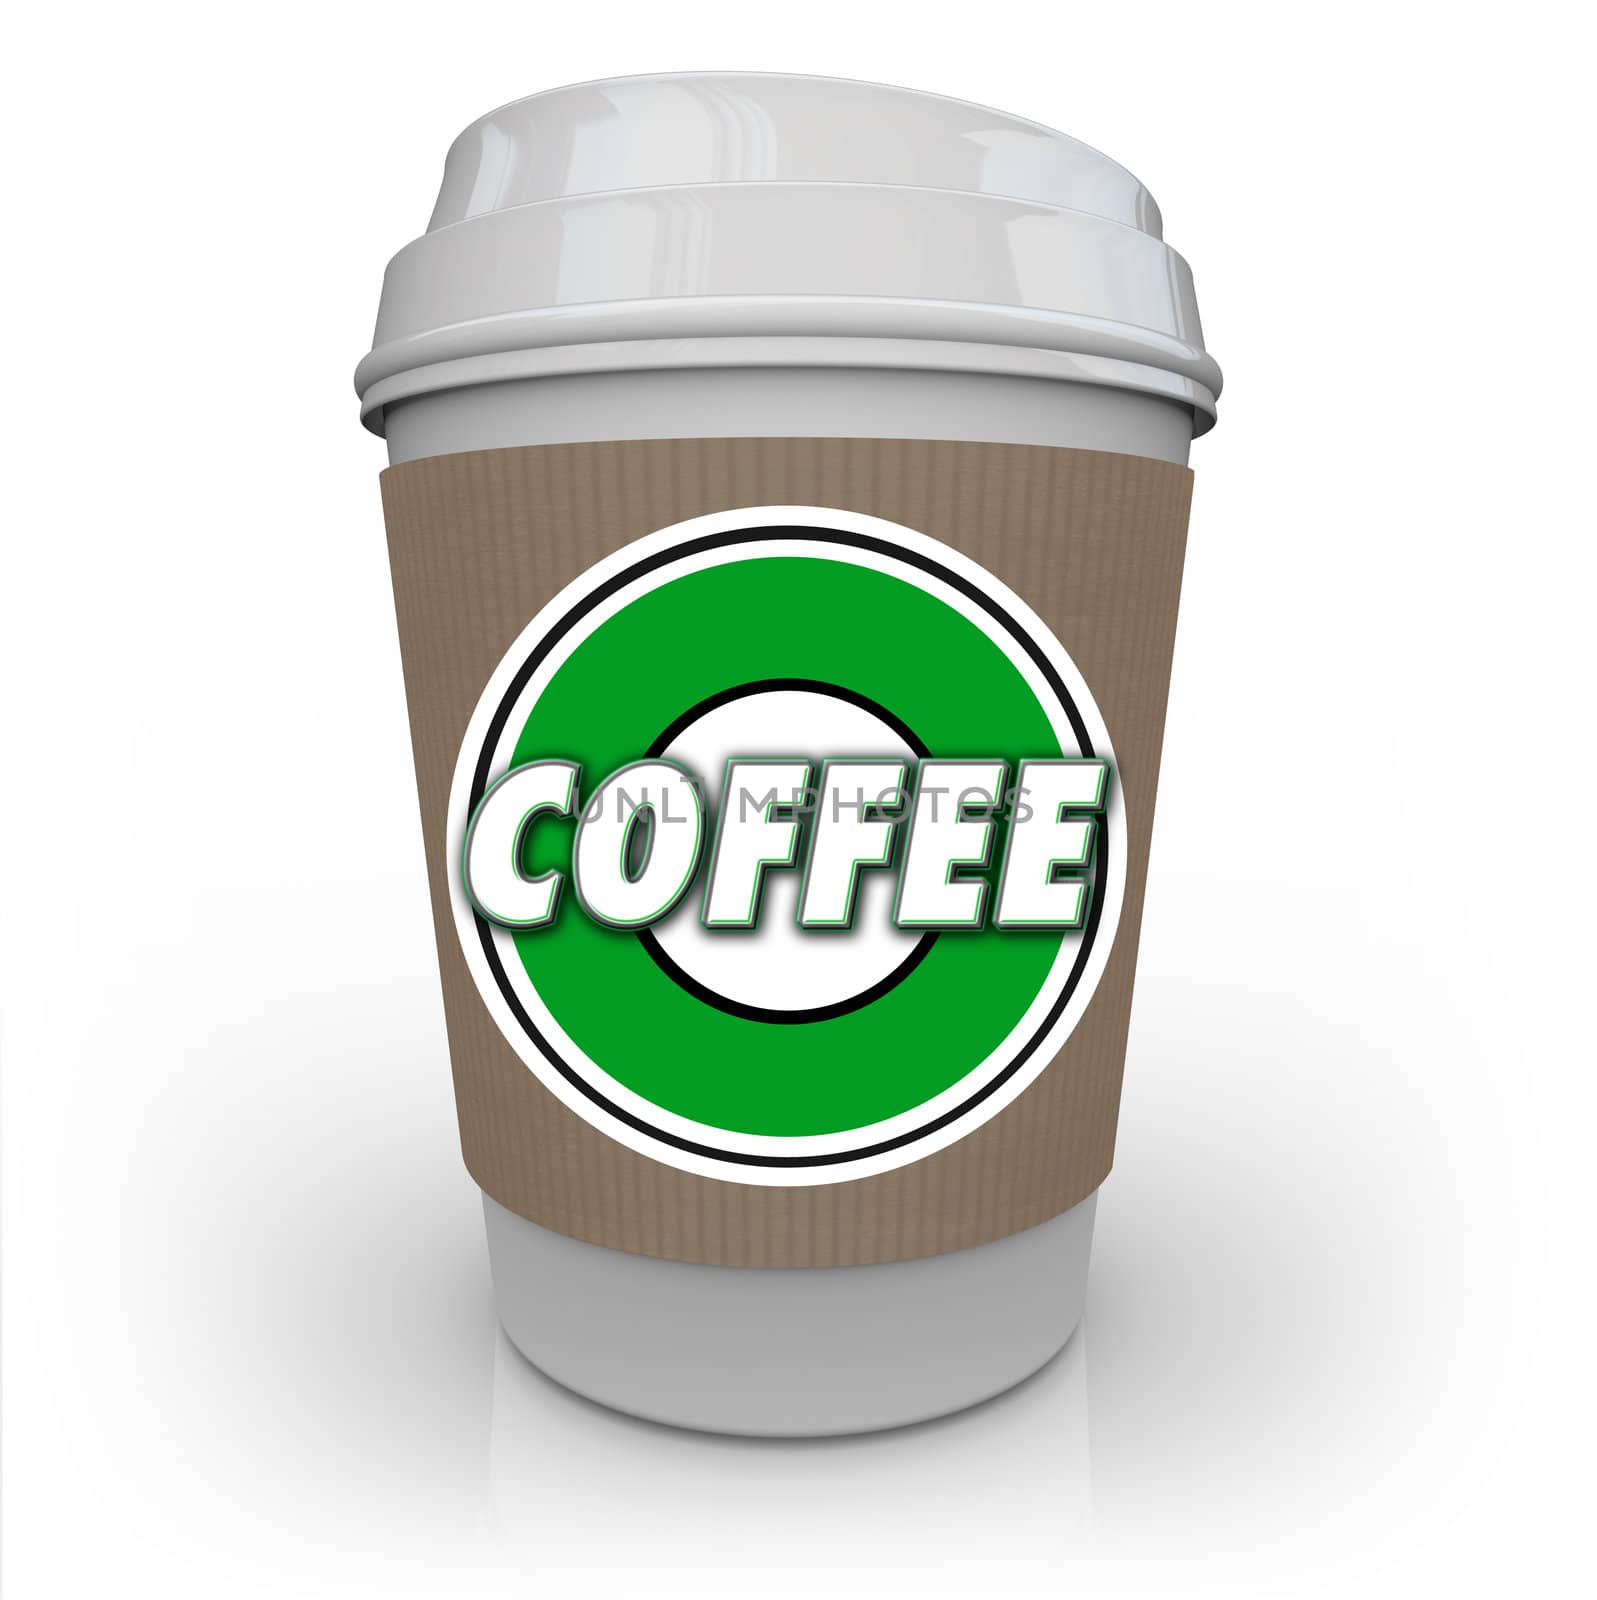 A cup of coffee from a store or restaurant with a holder sleeve and logo with the word Coffee on it to help wake you up in the morning with a jolt of caffeine java